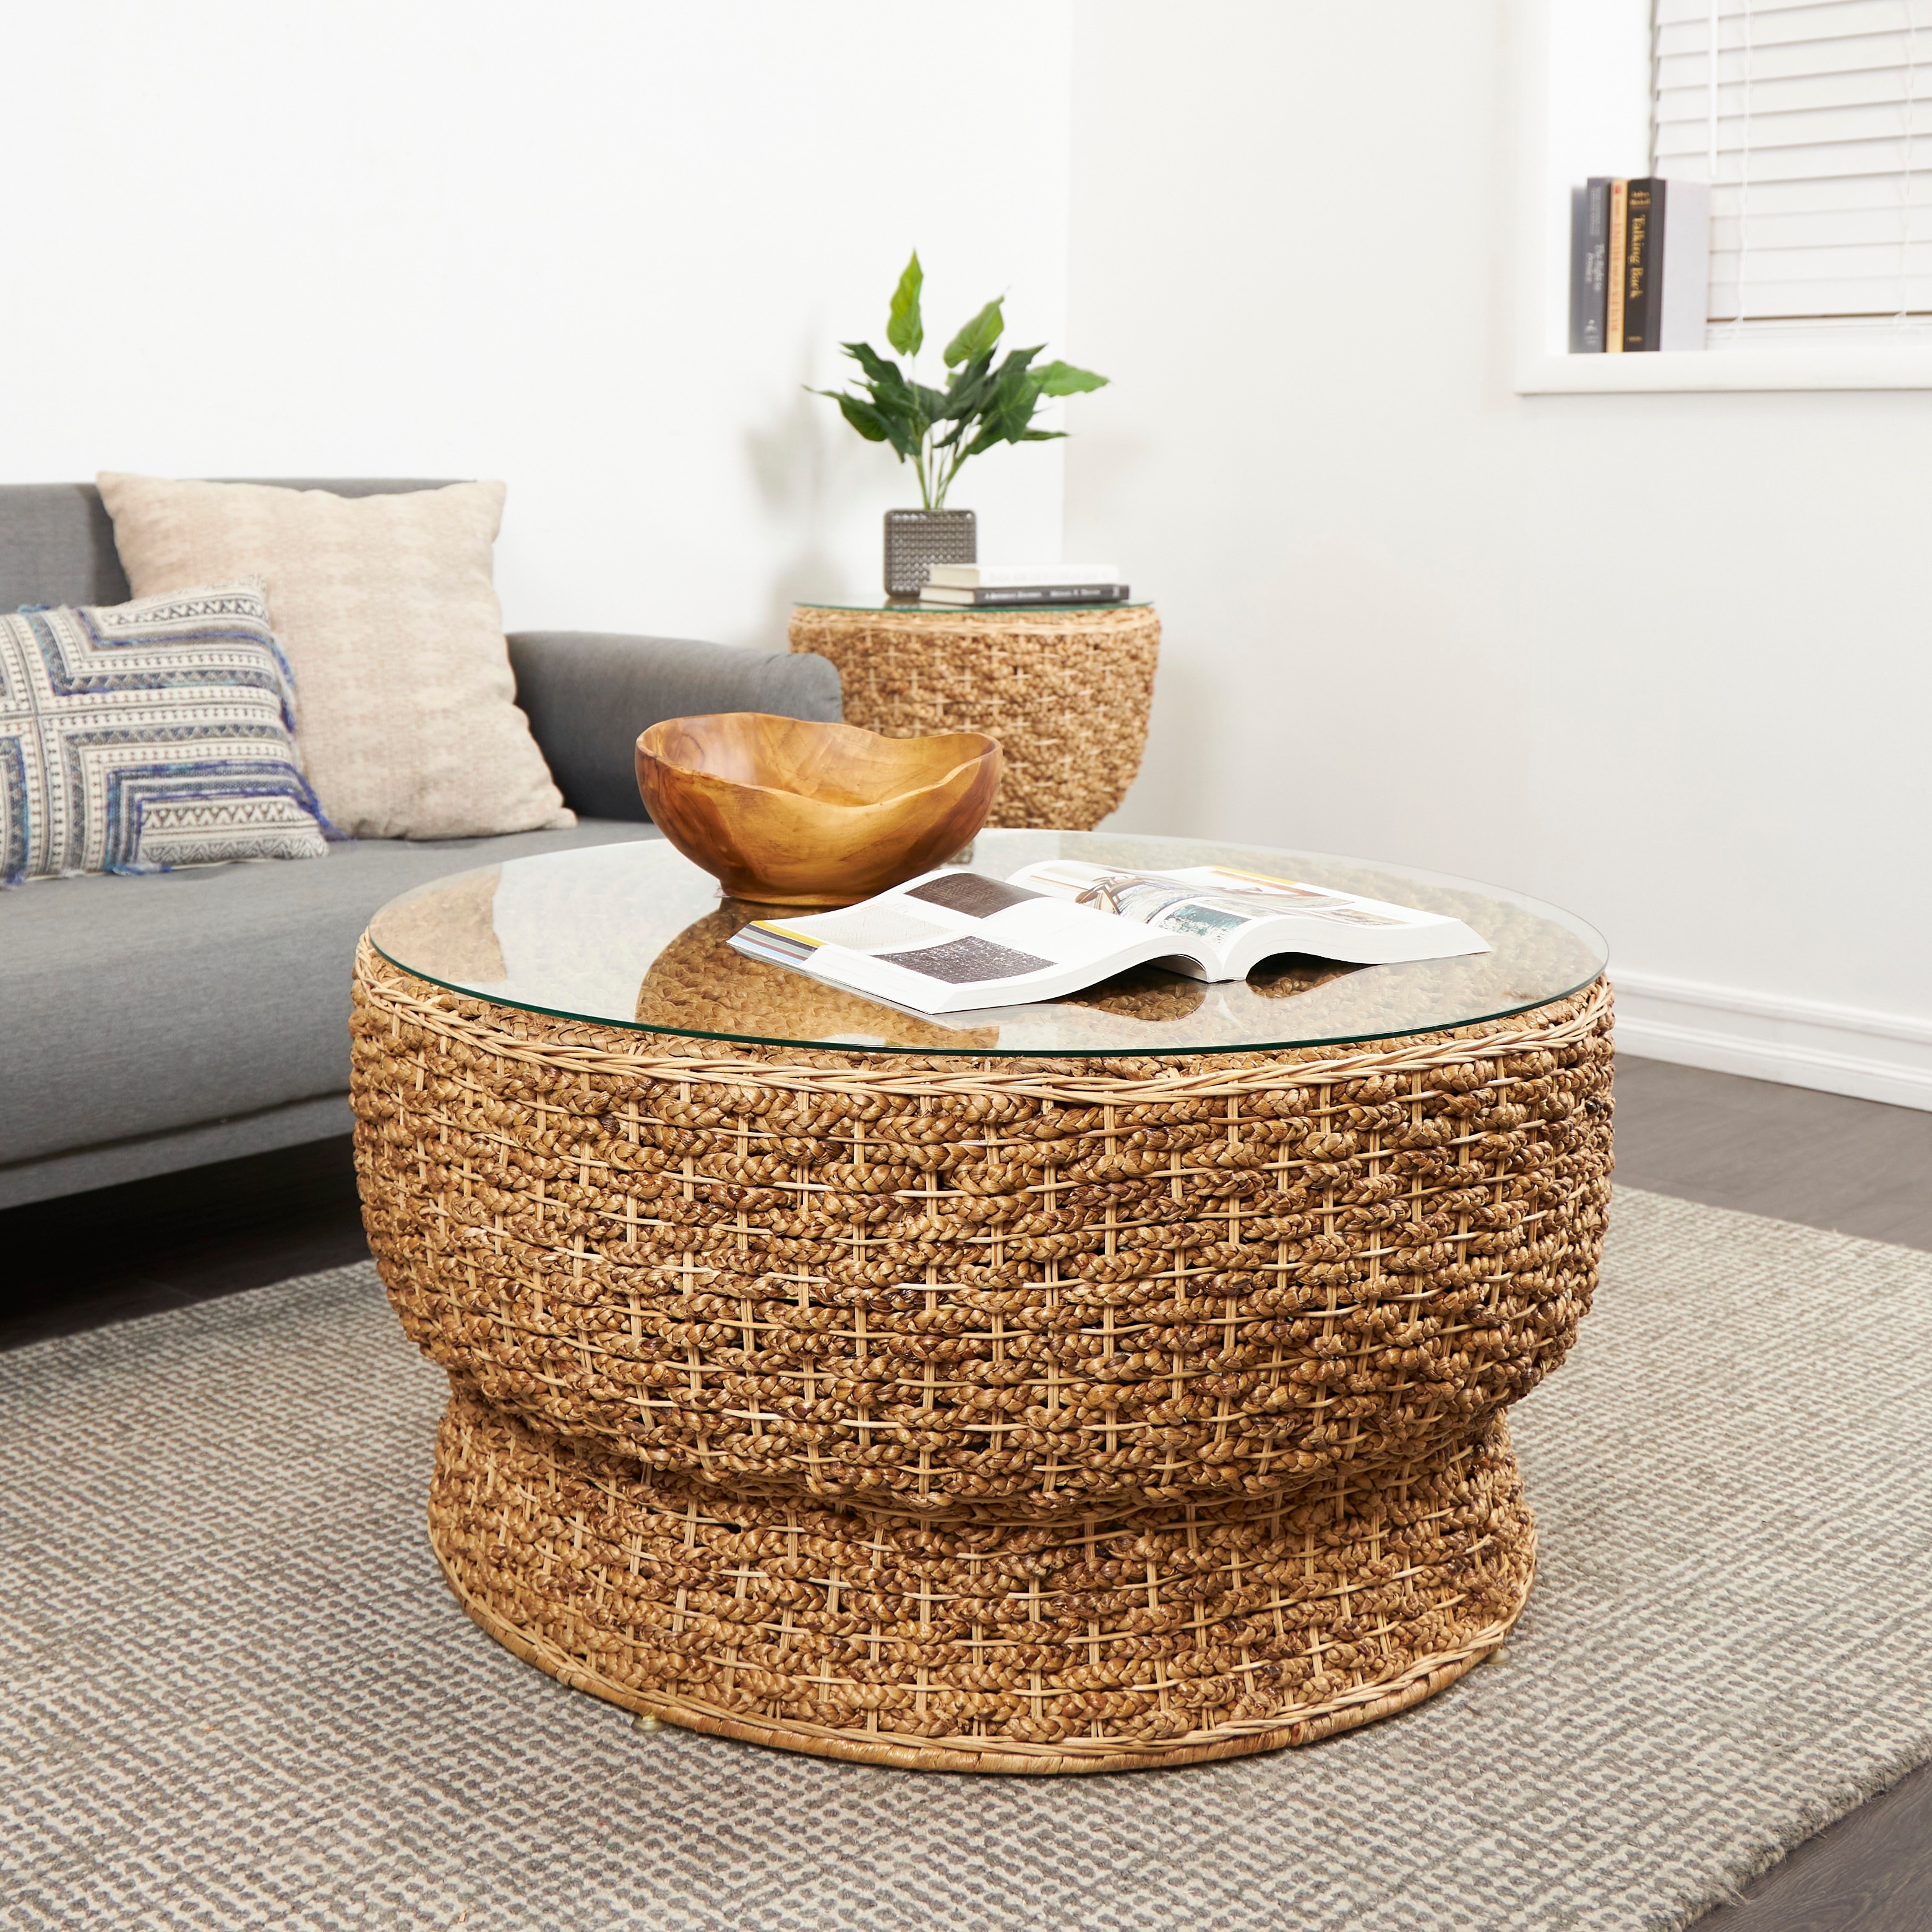 https://ak1.ostkcdn.com/images/products/is/images/direct/6c50de02af9c880ac2a58dc54eb426c0fe68a62e/Brown-Rattan-Handmade-Woven-Tapered-Coffee-Table-with-Glass-Top.jpg